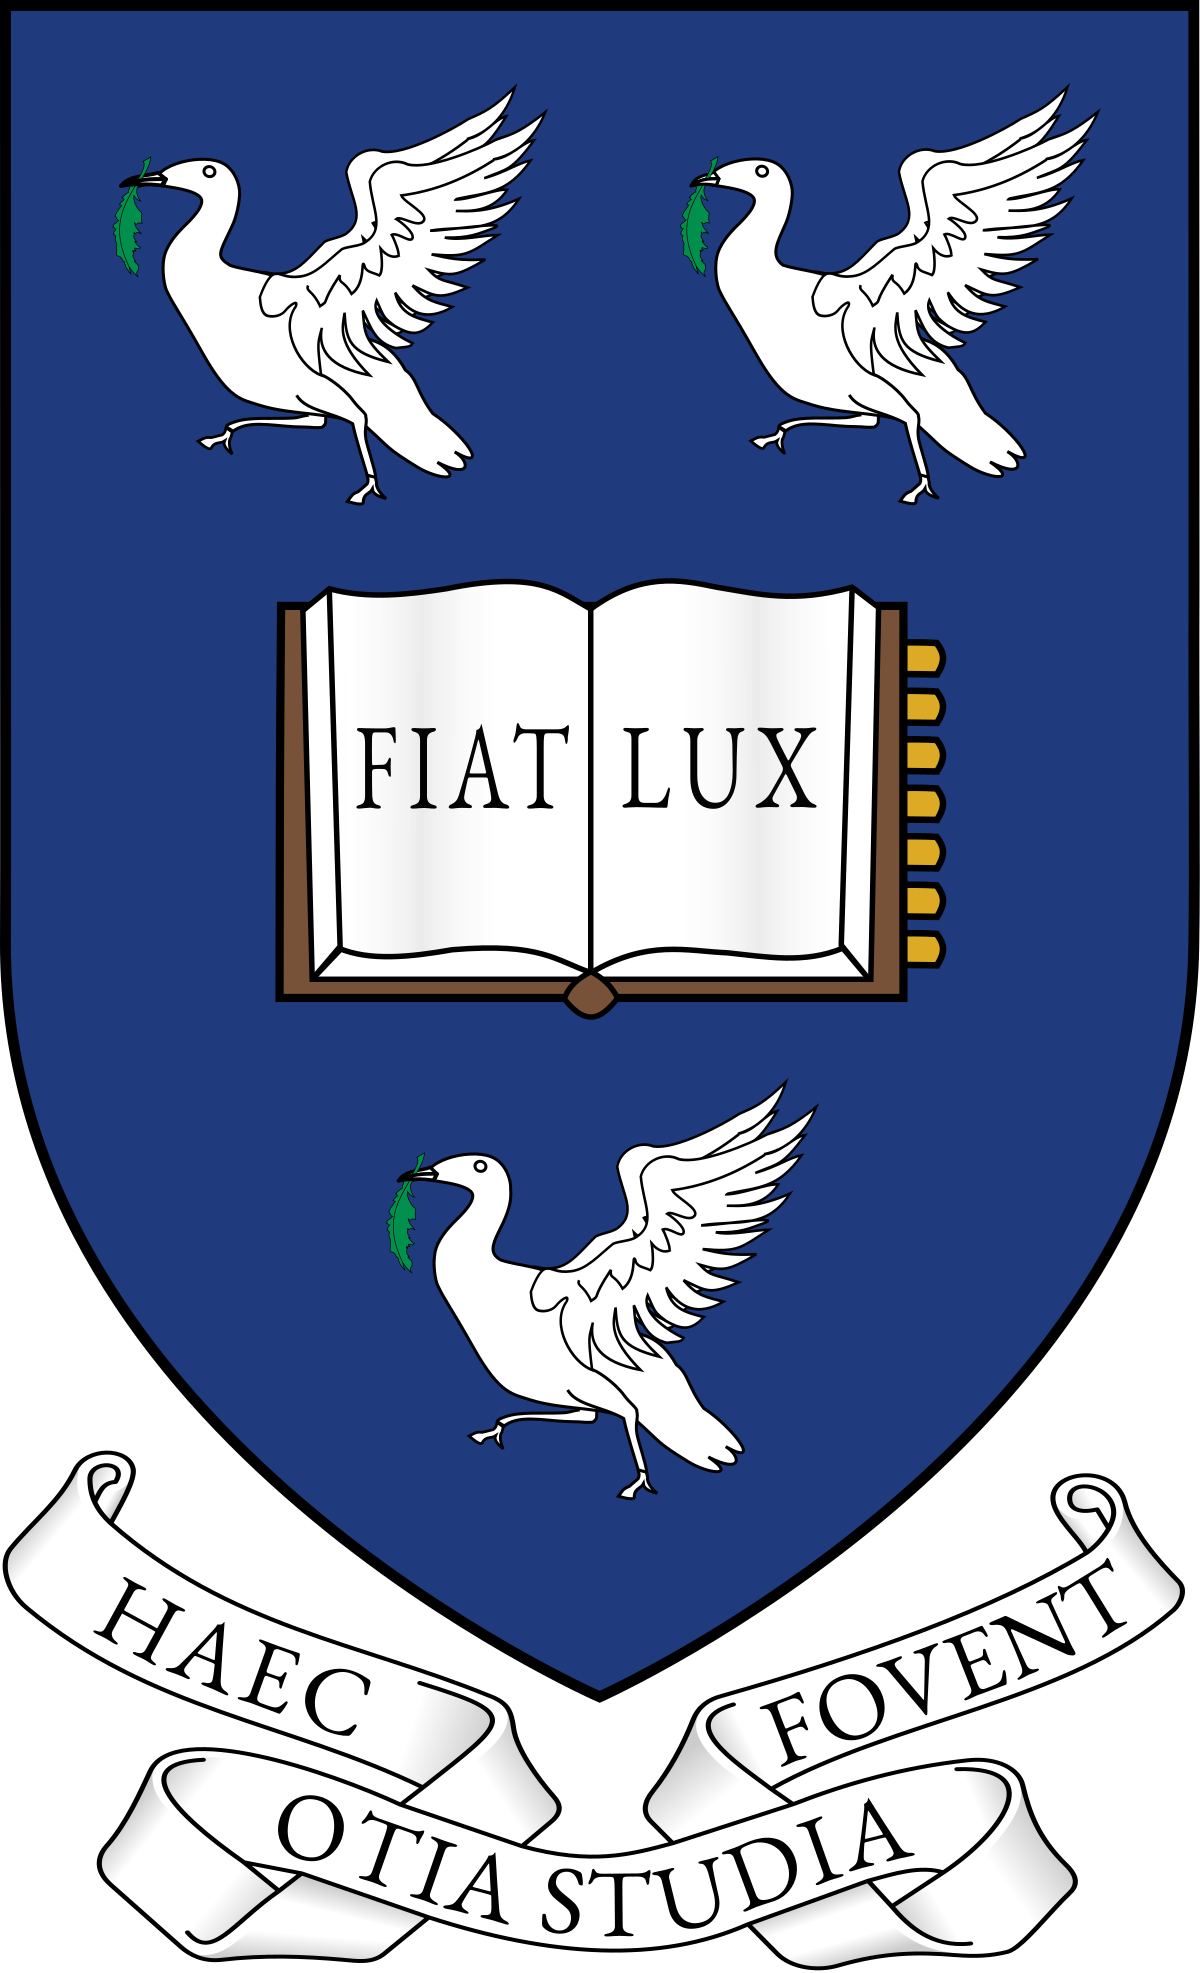 Arms of the University